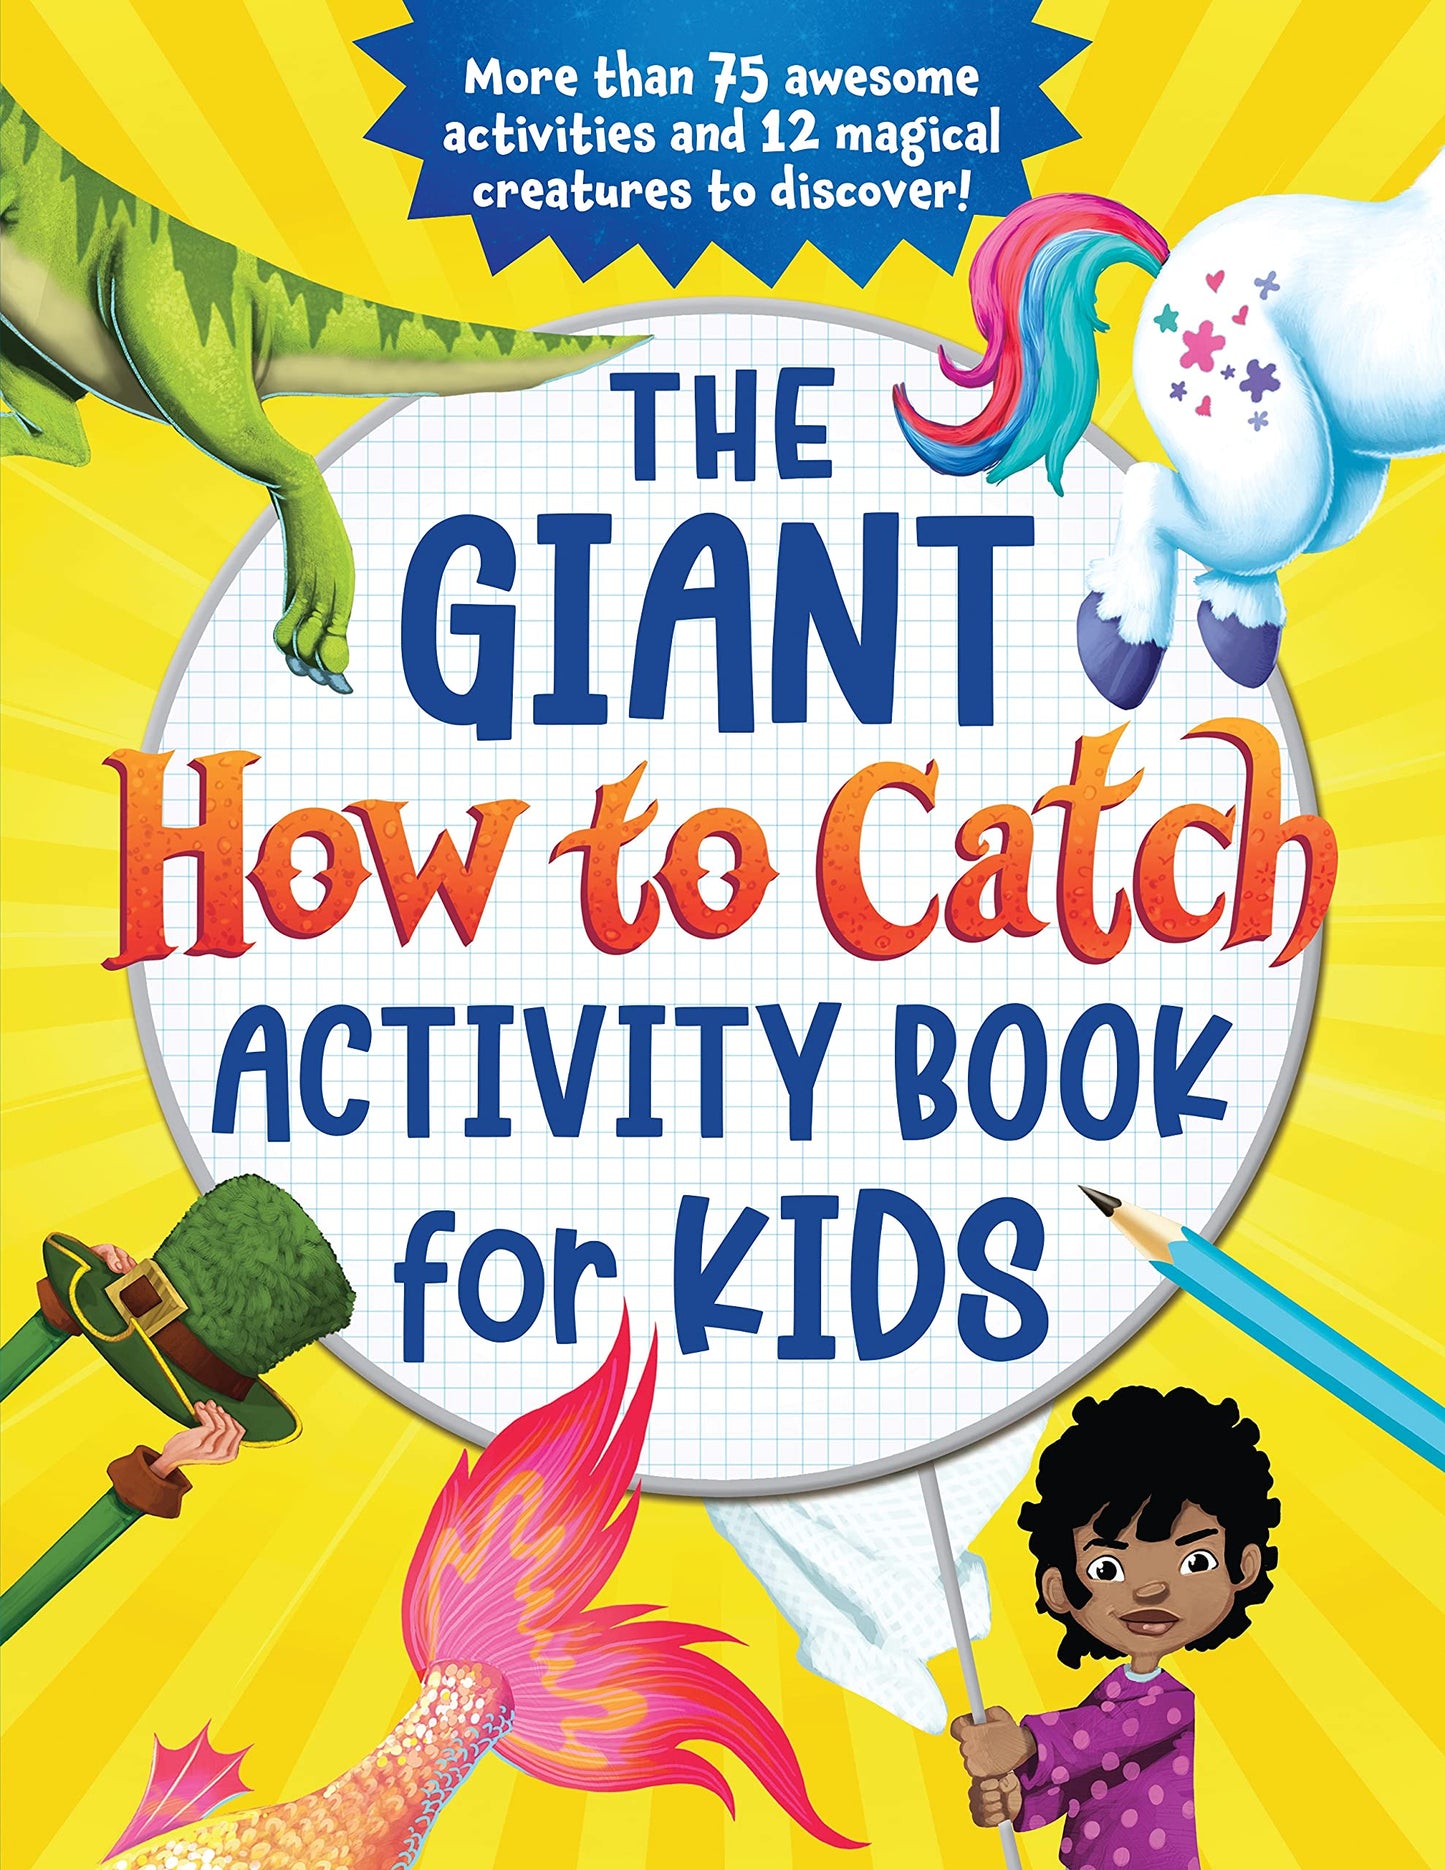 GIANT HOW TO CATCH ACTIVITY BOOK FOR KIDS